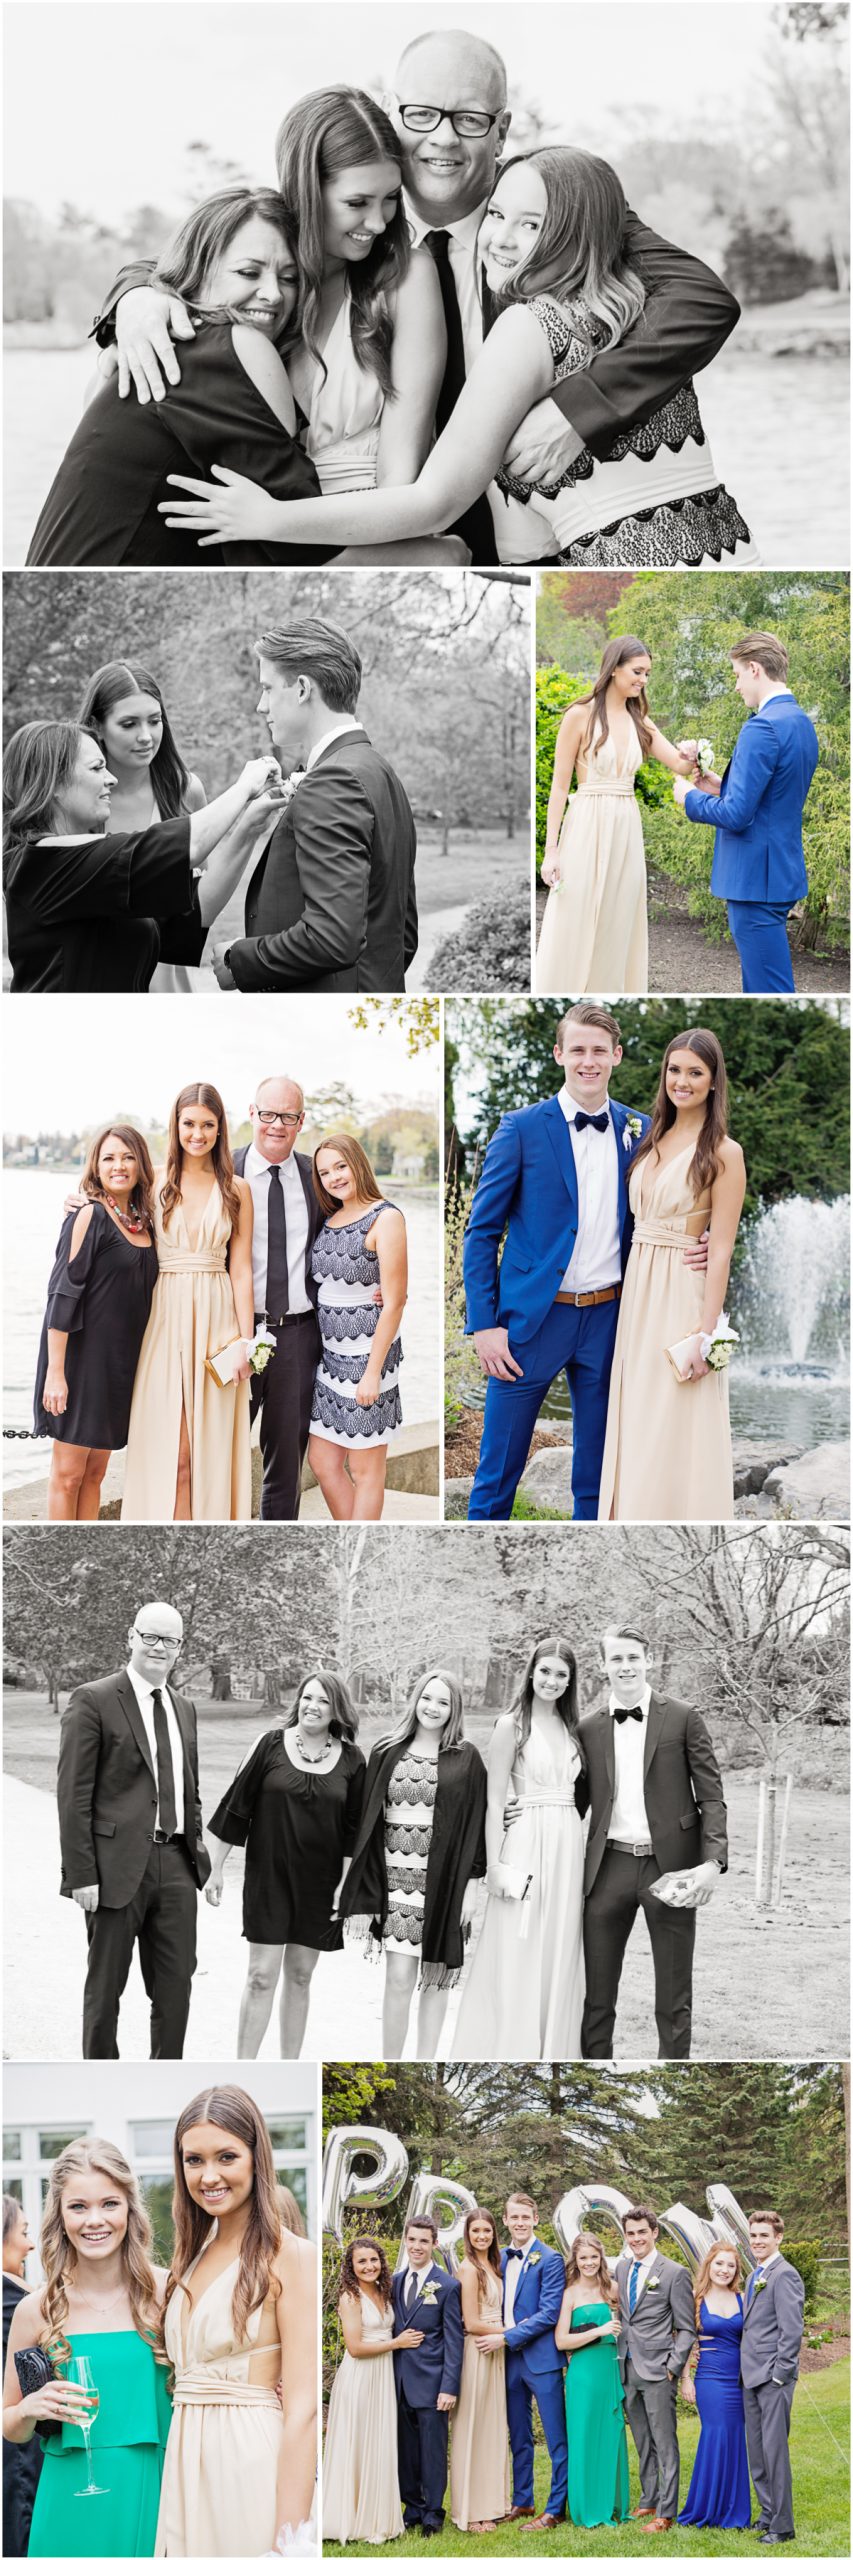 PreProm portraits and candid